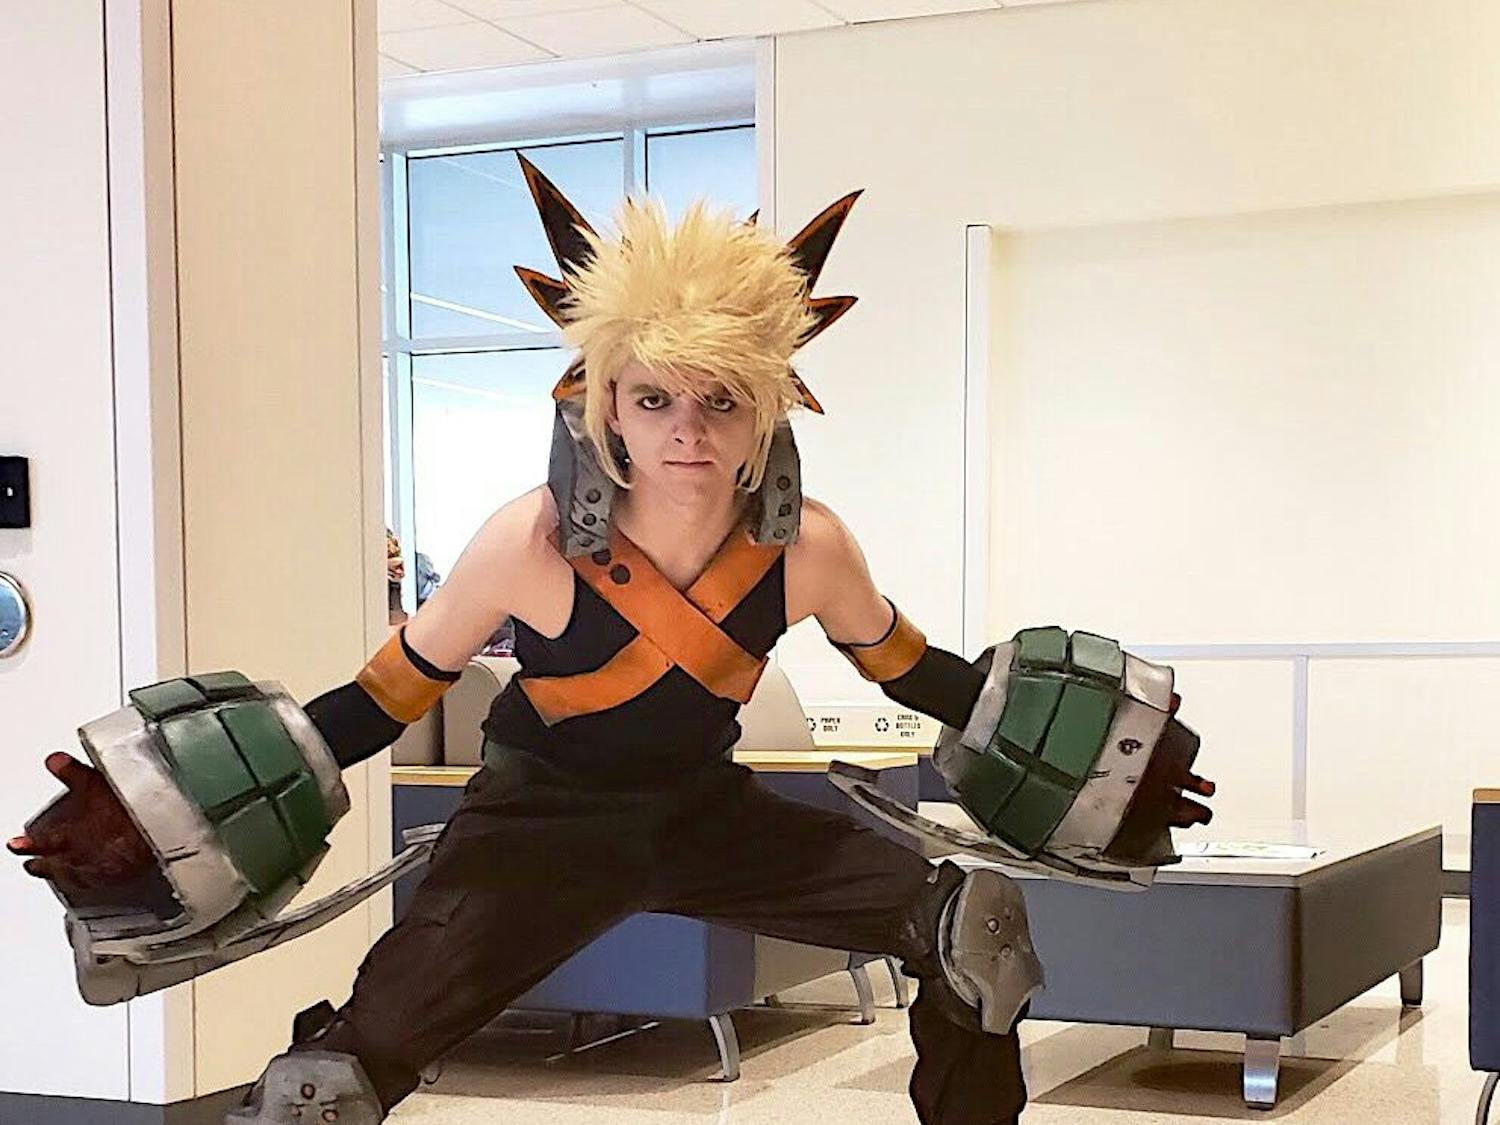 Katsuki Bakugo
James Memos, a 20-year-old Santa Fe freshman, cosplayed as “My Hero Academia” character Katsuki Bakugo. He decided to cosplay the angry character because he loves how Bakugo thinks he’s better than everyone else.
“I feel like that arrogant persona is something that I identify with quite a bit,” he said.
It took him a week to make the costume and he used foam from a gym mat to make the grenades, Memos said.
He advises first-time cosplayers to “just do it.”
“It can make you nervous,” he said. “But once you're in costume, it's so much easier to talk to people. Instead of having some sort of cold approach, you could just be like ‘hey what's up Batman,’ and then you're instantly friends.”
&nbsp;